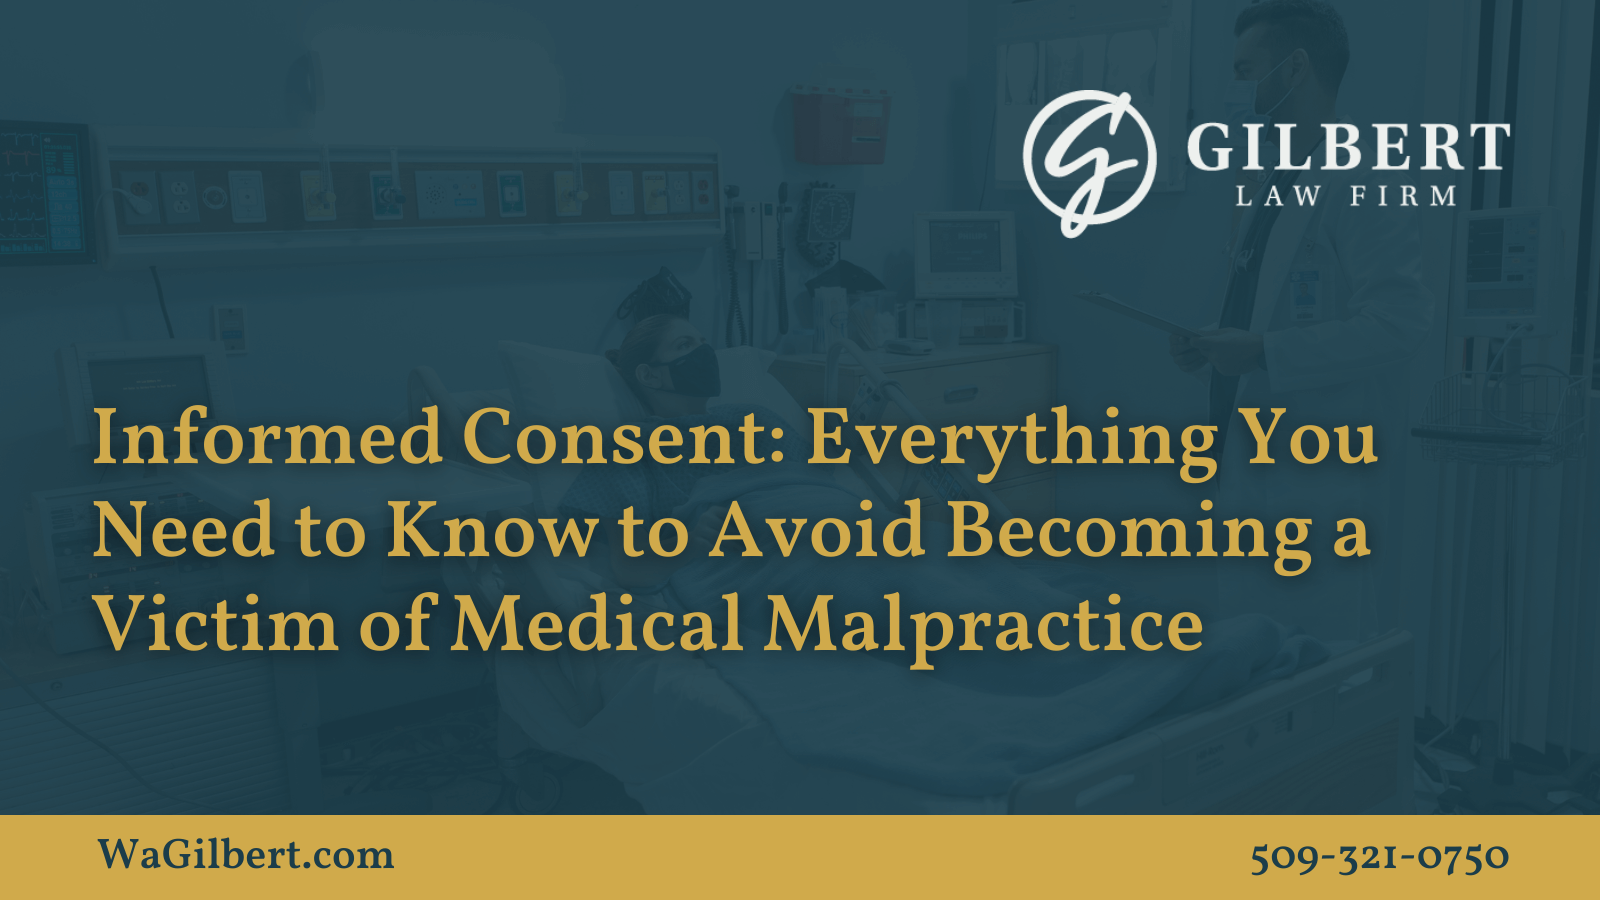 Informed Consent: Everything You Need to Know to Avoid Becoming a Victim of Medical Malpractice | Gilbert Law Firm Spokane Washington